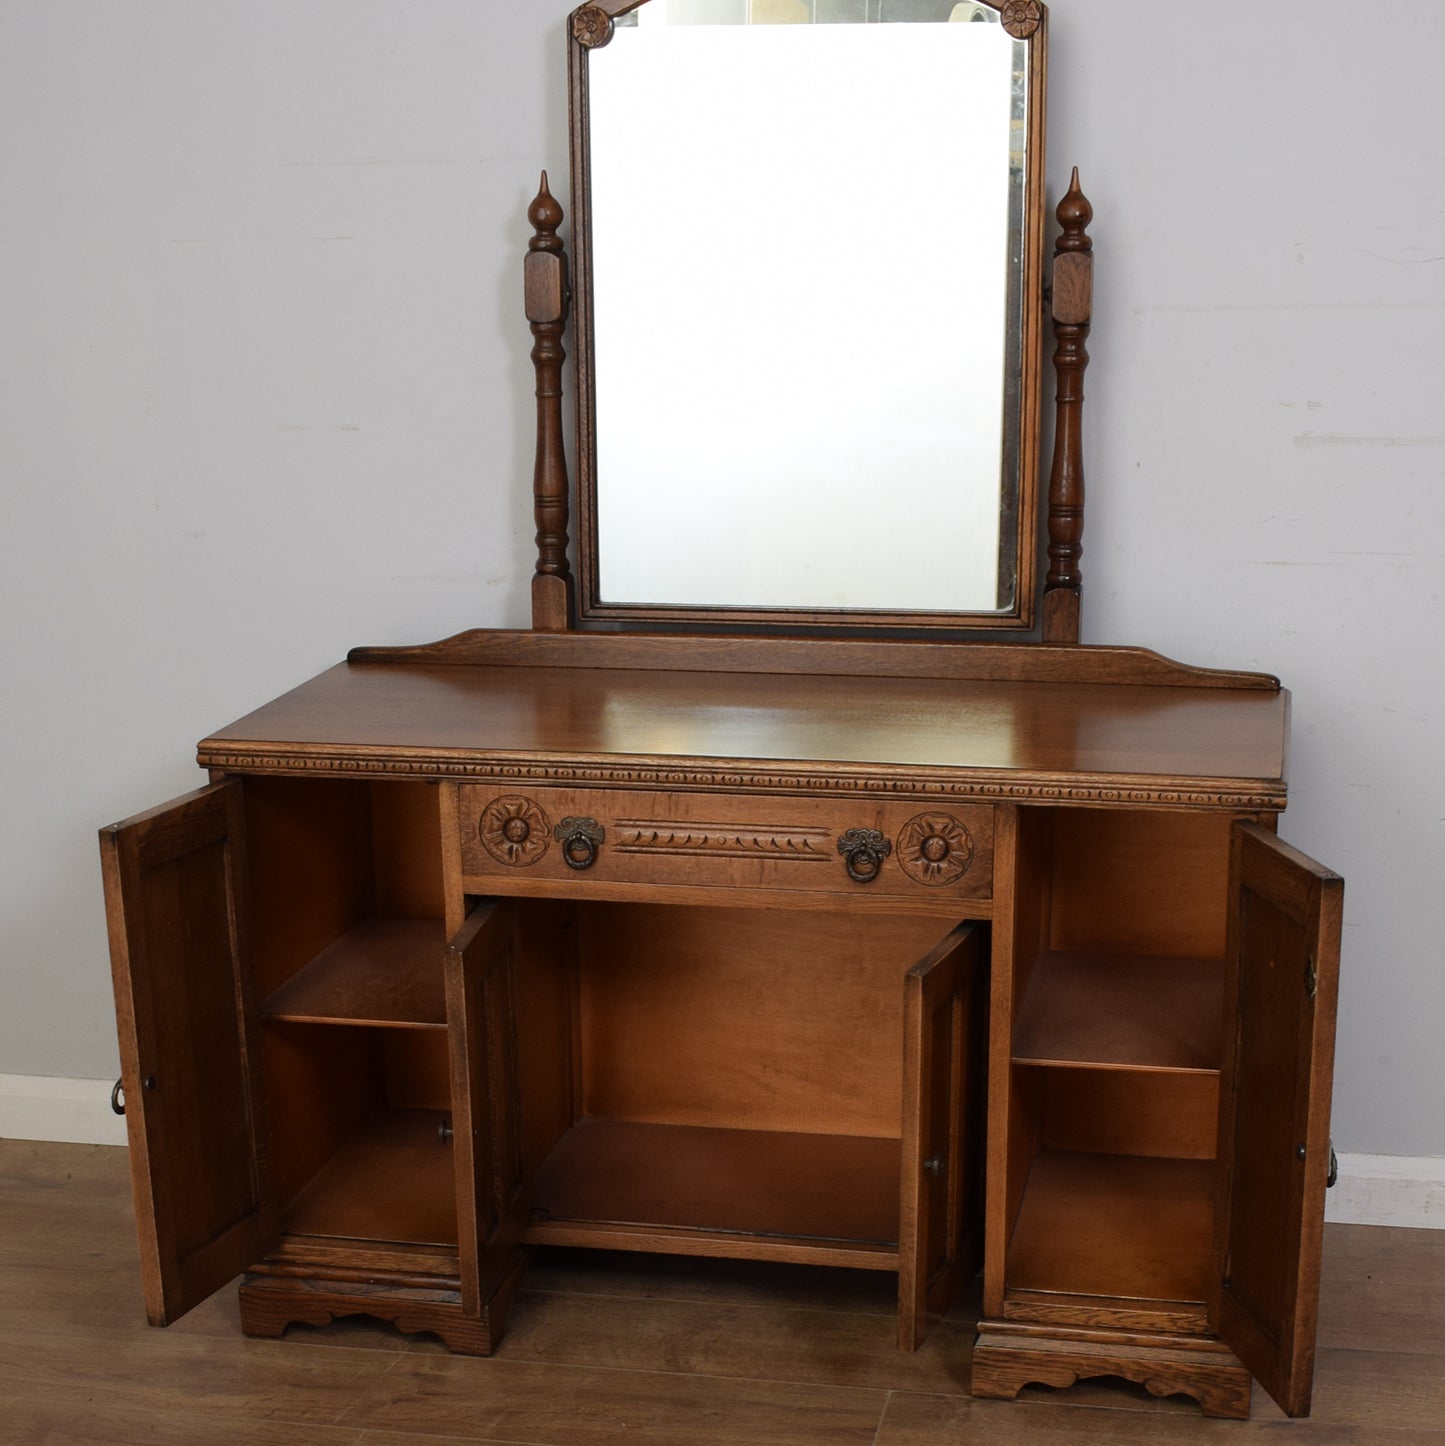 Restored Old Charm Dressing Table